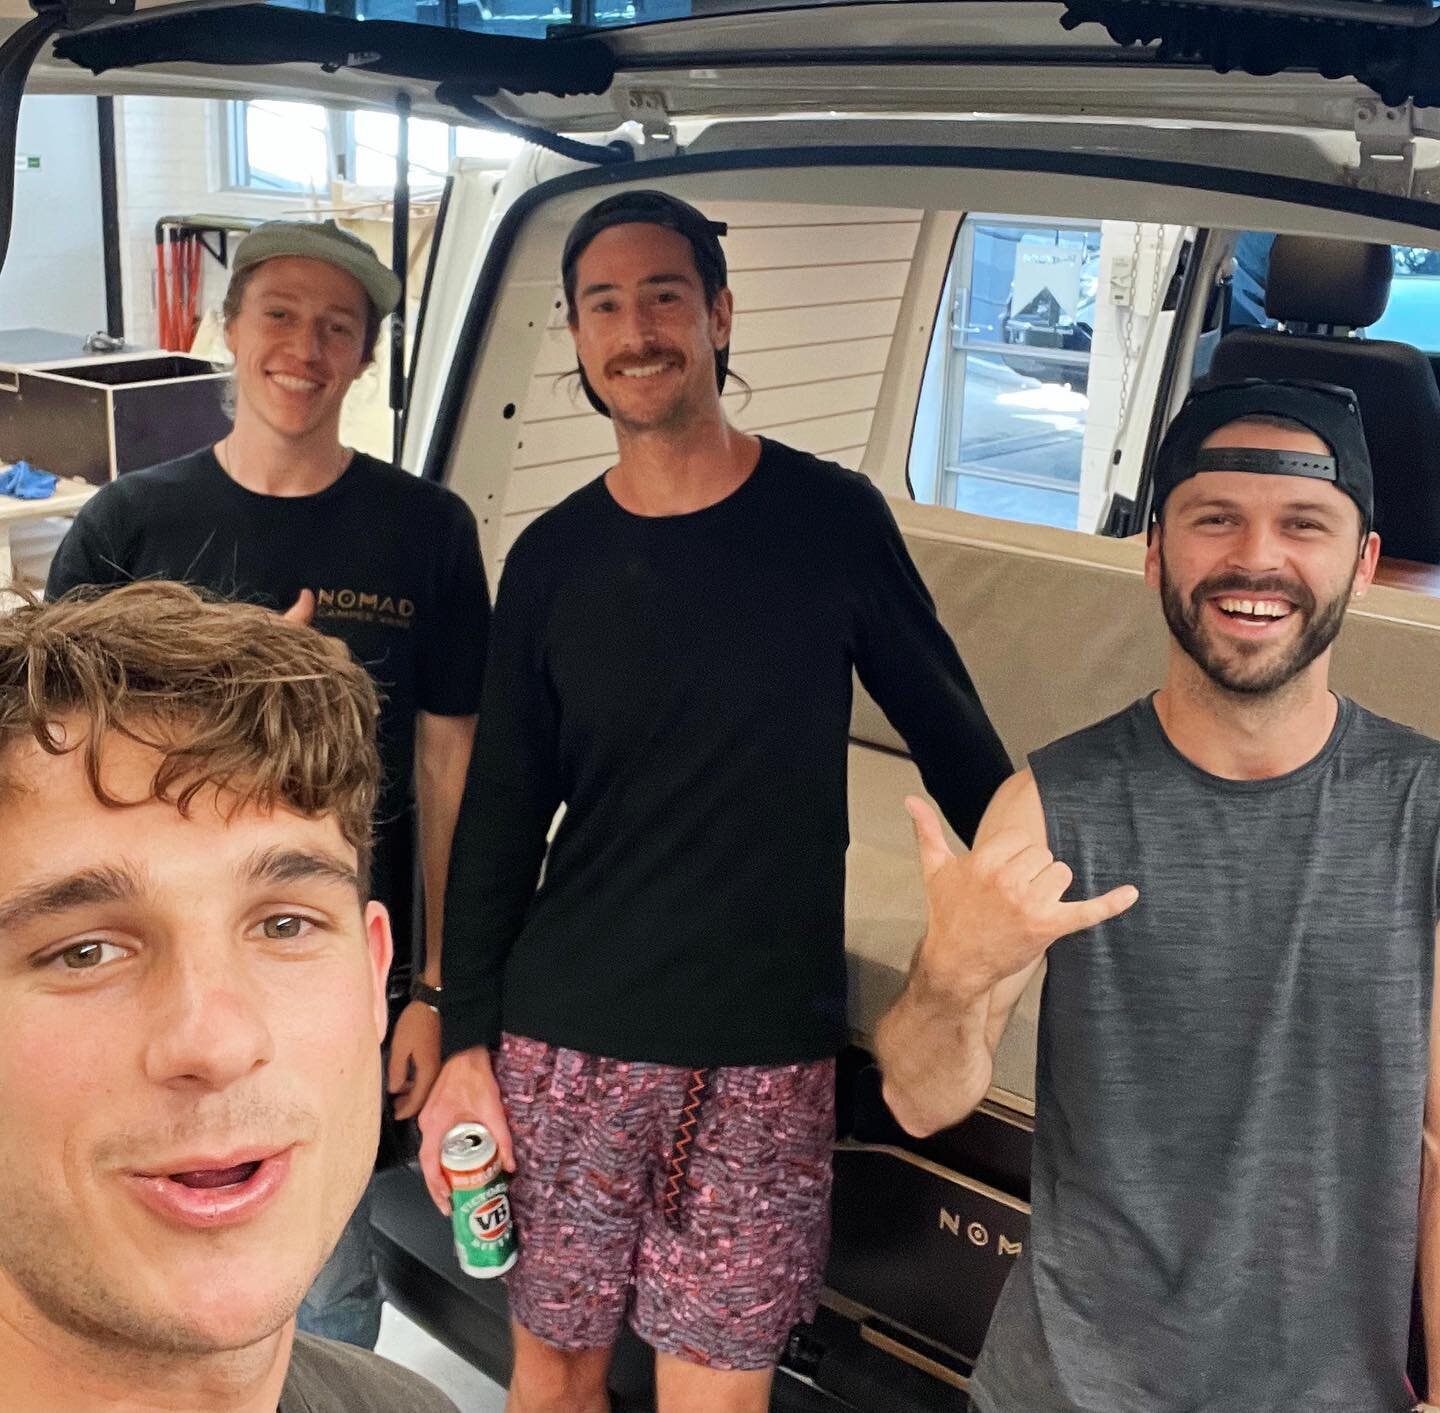 I&rsquo;m grateful for my team, for awesome customers, for getting to build cool things and make people happy! 
Alastair came all the way up from Melbourne for us to build his van and is continuing straight on to adventure wherever the road takes him